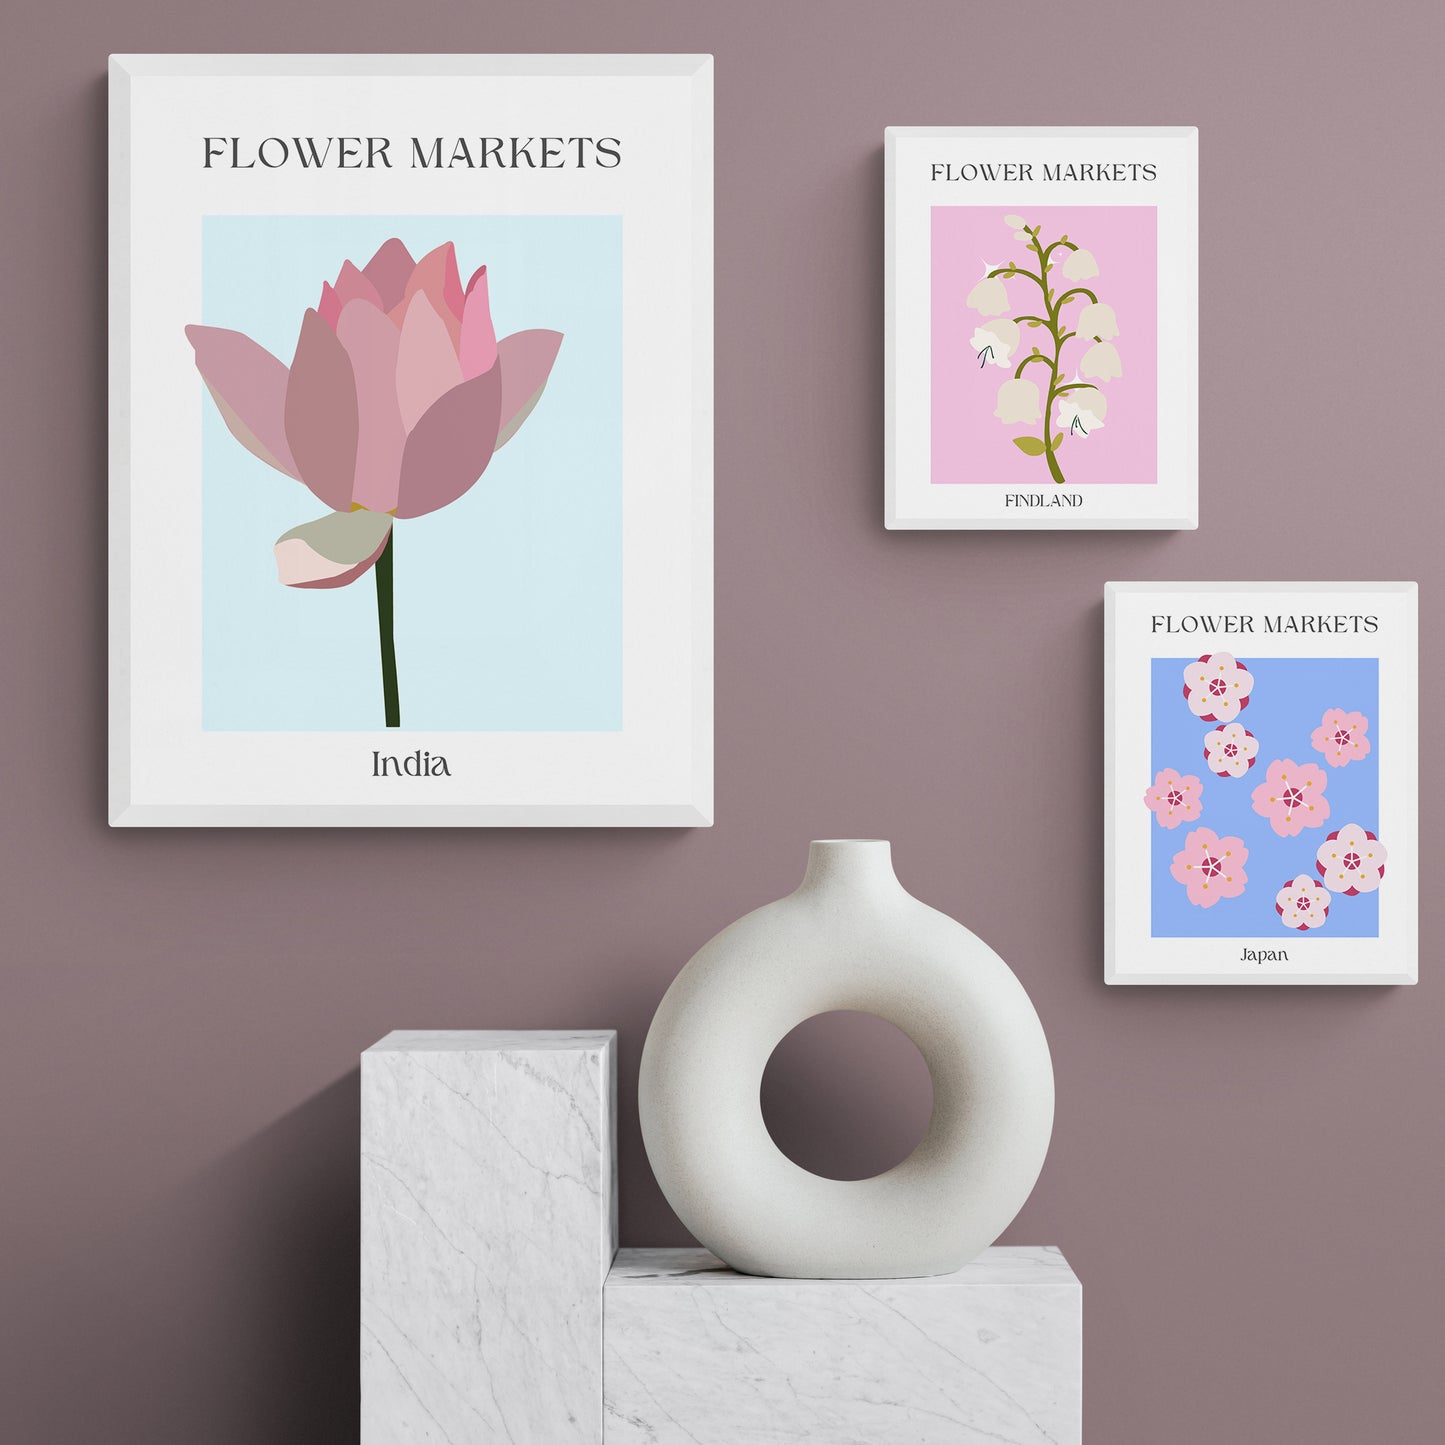 This France Flowers Market Print poster will elevate any room with its stunning Art Des Formes Courbes aesthetic, sophisticated gallery wall inspiration, and Matisse-inspired floral drawing rendered in beautiful pastel shades. Perfect for livening up any space, this premium poster is sure to become a favorite.